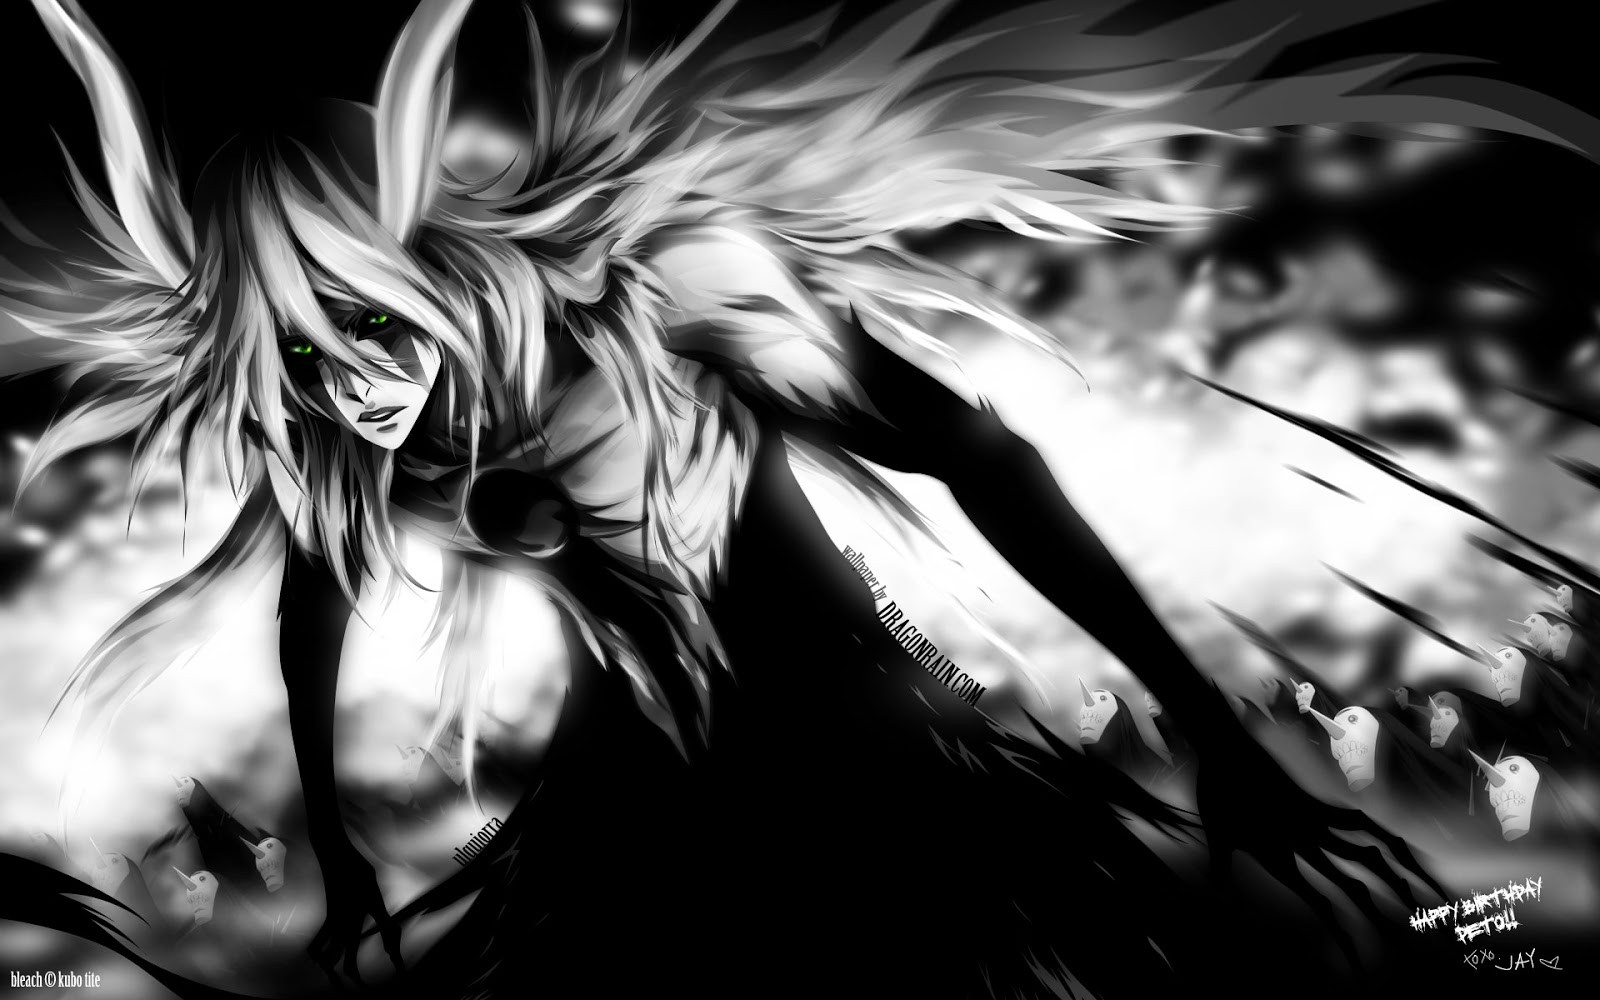 Ulquiorra Cifer 9 Fan Arts and Wallpapers  Your daily Anime Wallpaper and Fan Art